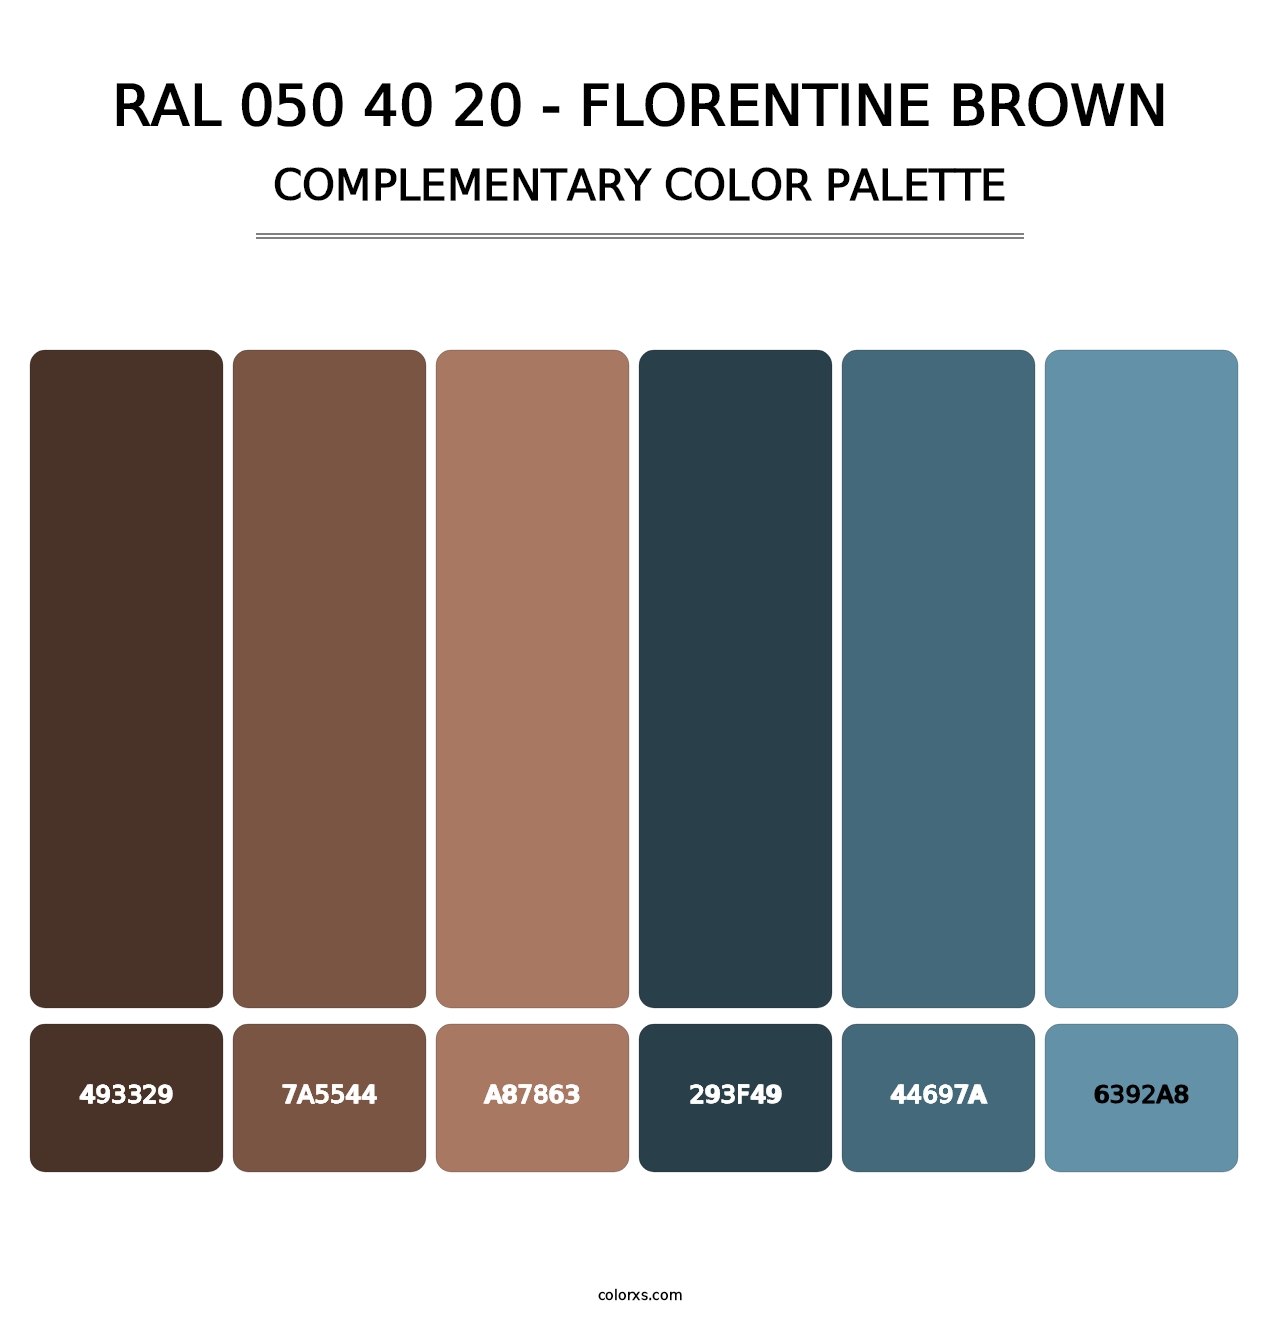 RAL 050 40 20 - Florentine Brown - Complementary Color Palette